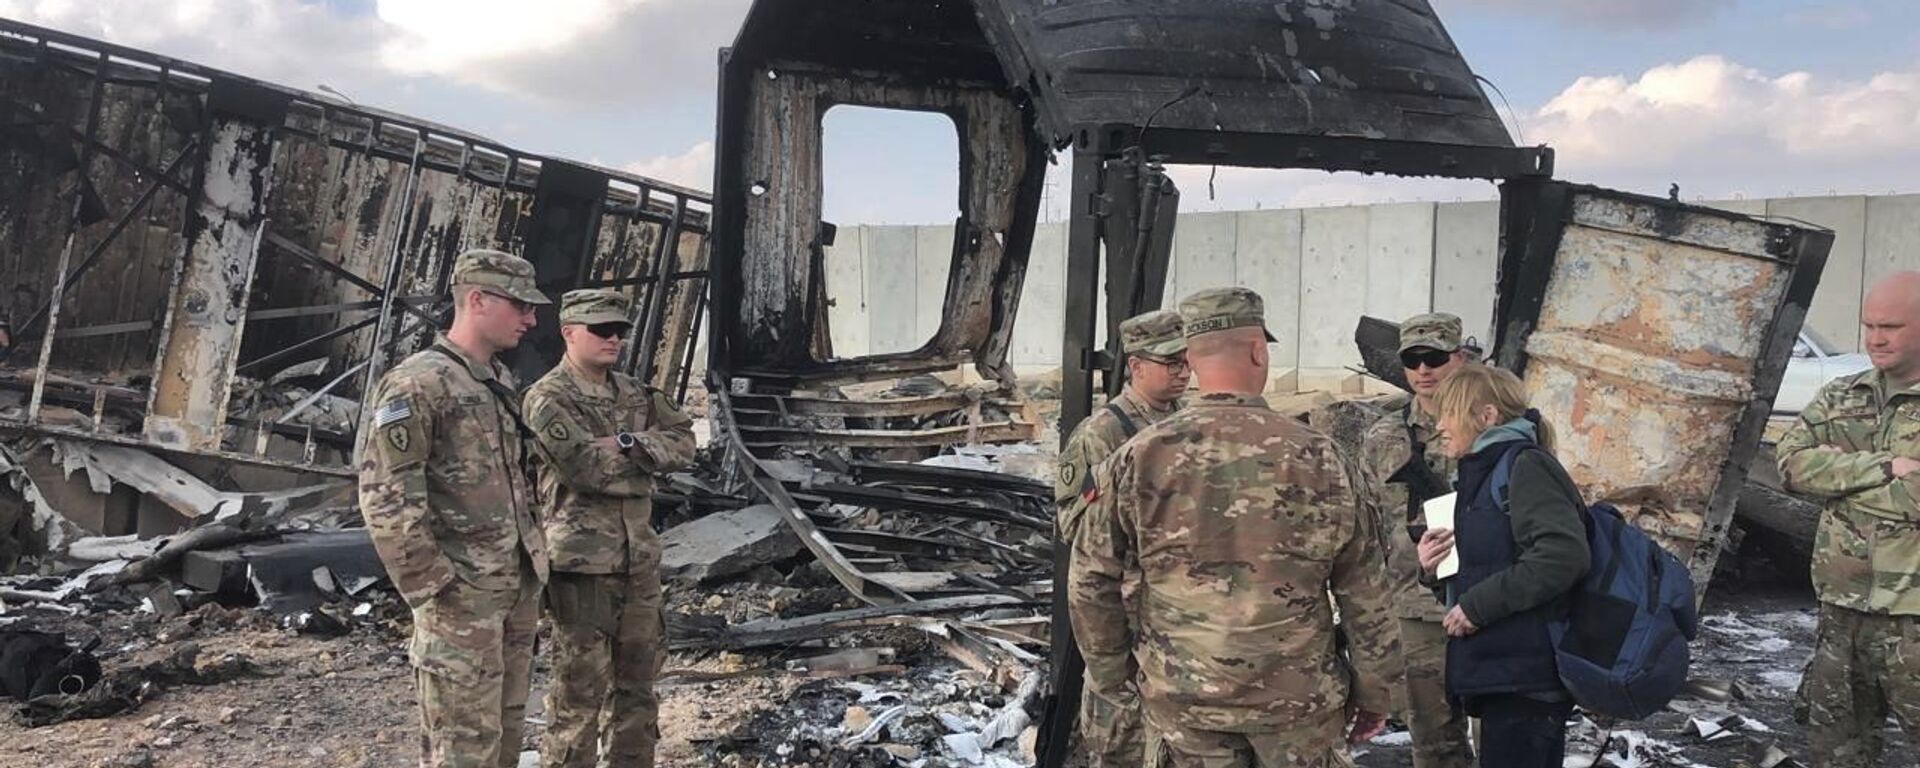 US Soldiers stand amid damage at a site of an Iranian bombing at Ain al-Asad Air Base, in Anbar, Iraq, Monday, 13 January 2020. Ain al-Asad Air Base was struck by a barrage of Iranian missiles on Wednesday, in retaliation for the US drone strike that killed a top Iranian commander, General Qassem Soleimani, whose killing raised fears of a wider war in the Middle East.  - Sputnik International, 1920, 17.12.2021